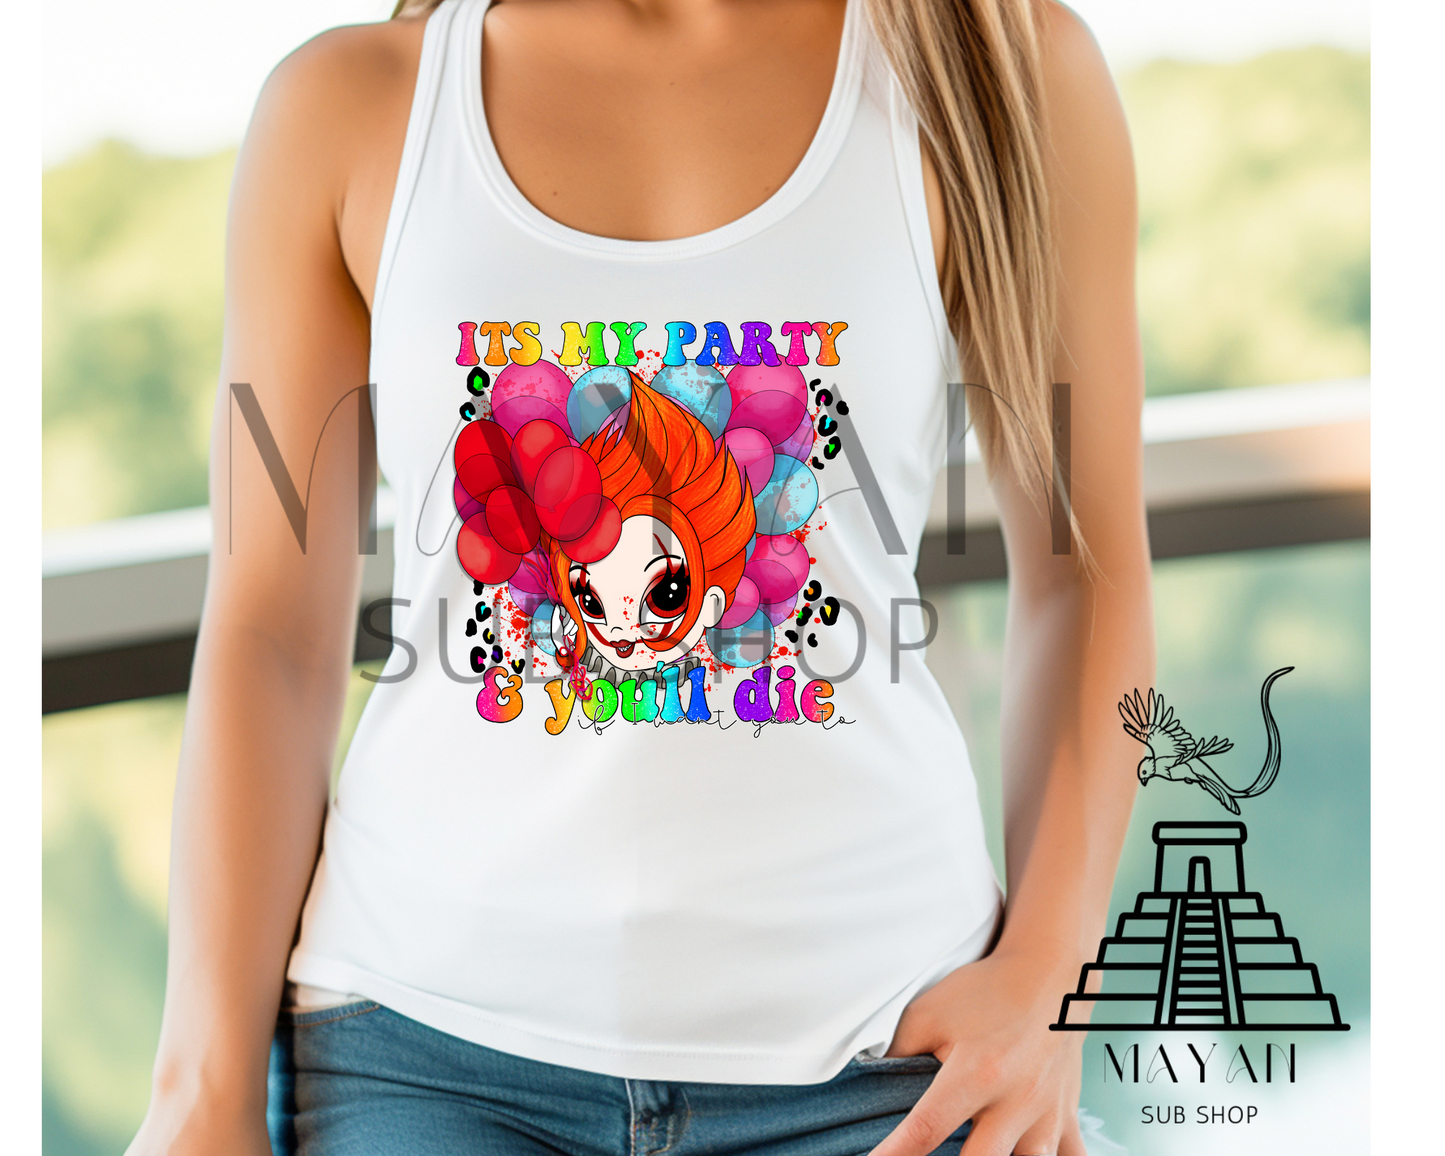 It's my party tank top - Mayan Sub Shop